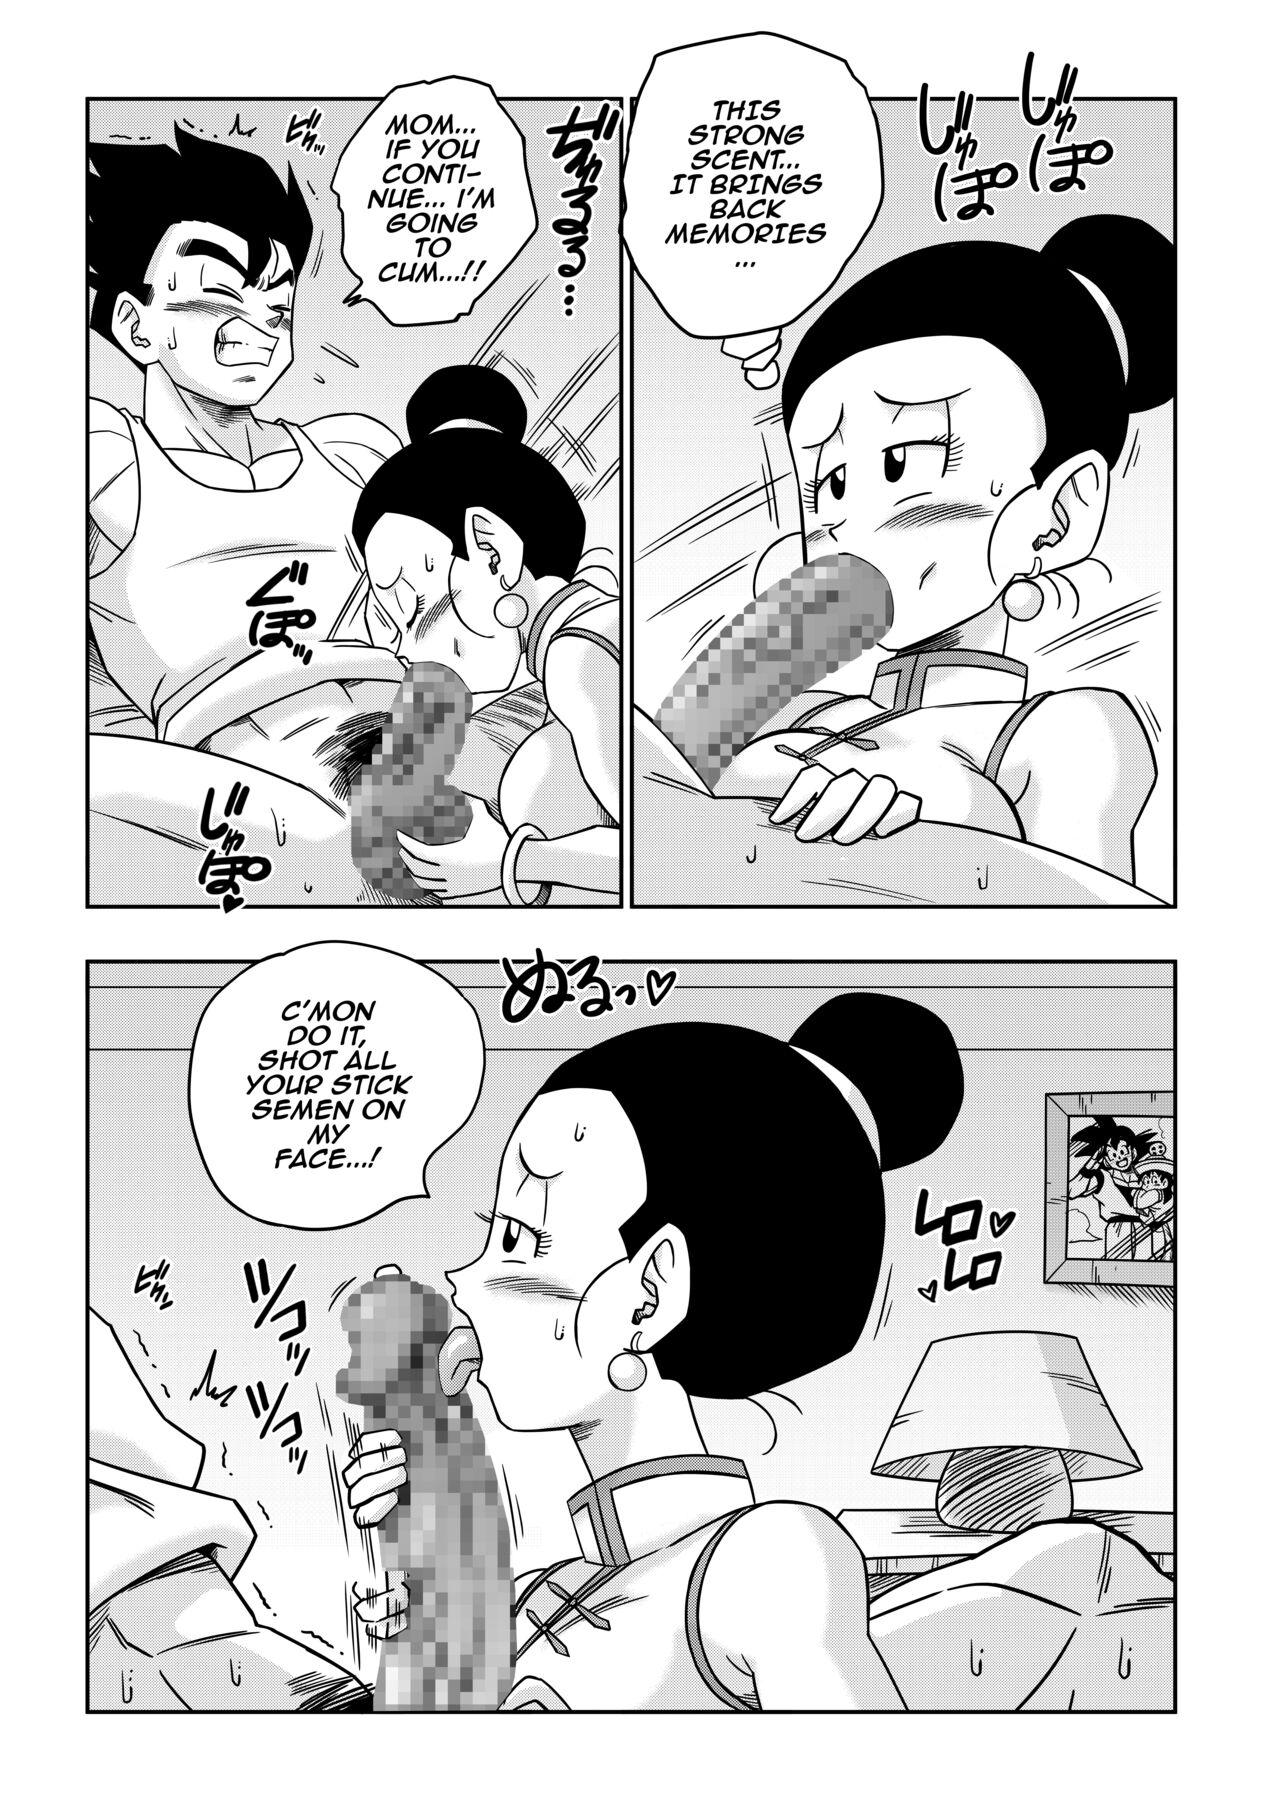 Girl LOVE TRIANGLE Z PART 5 - Dragon ball z Oiled - Page 6